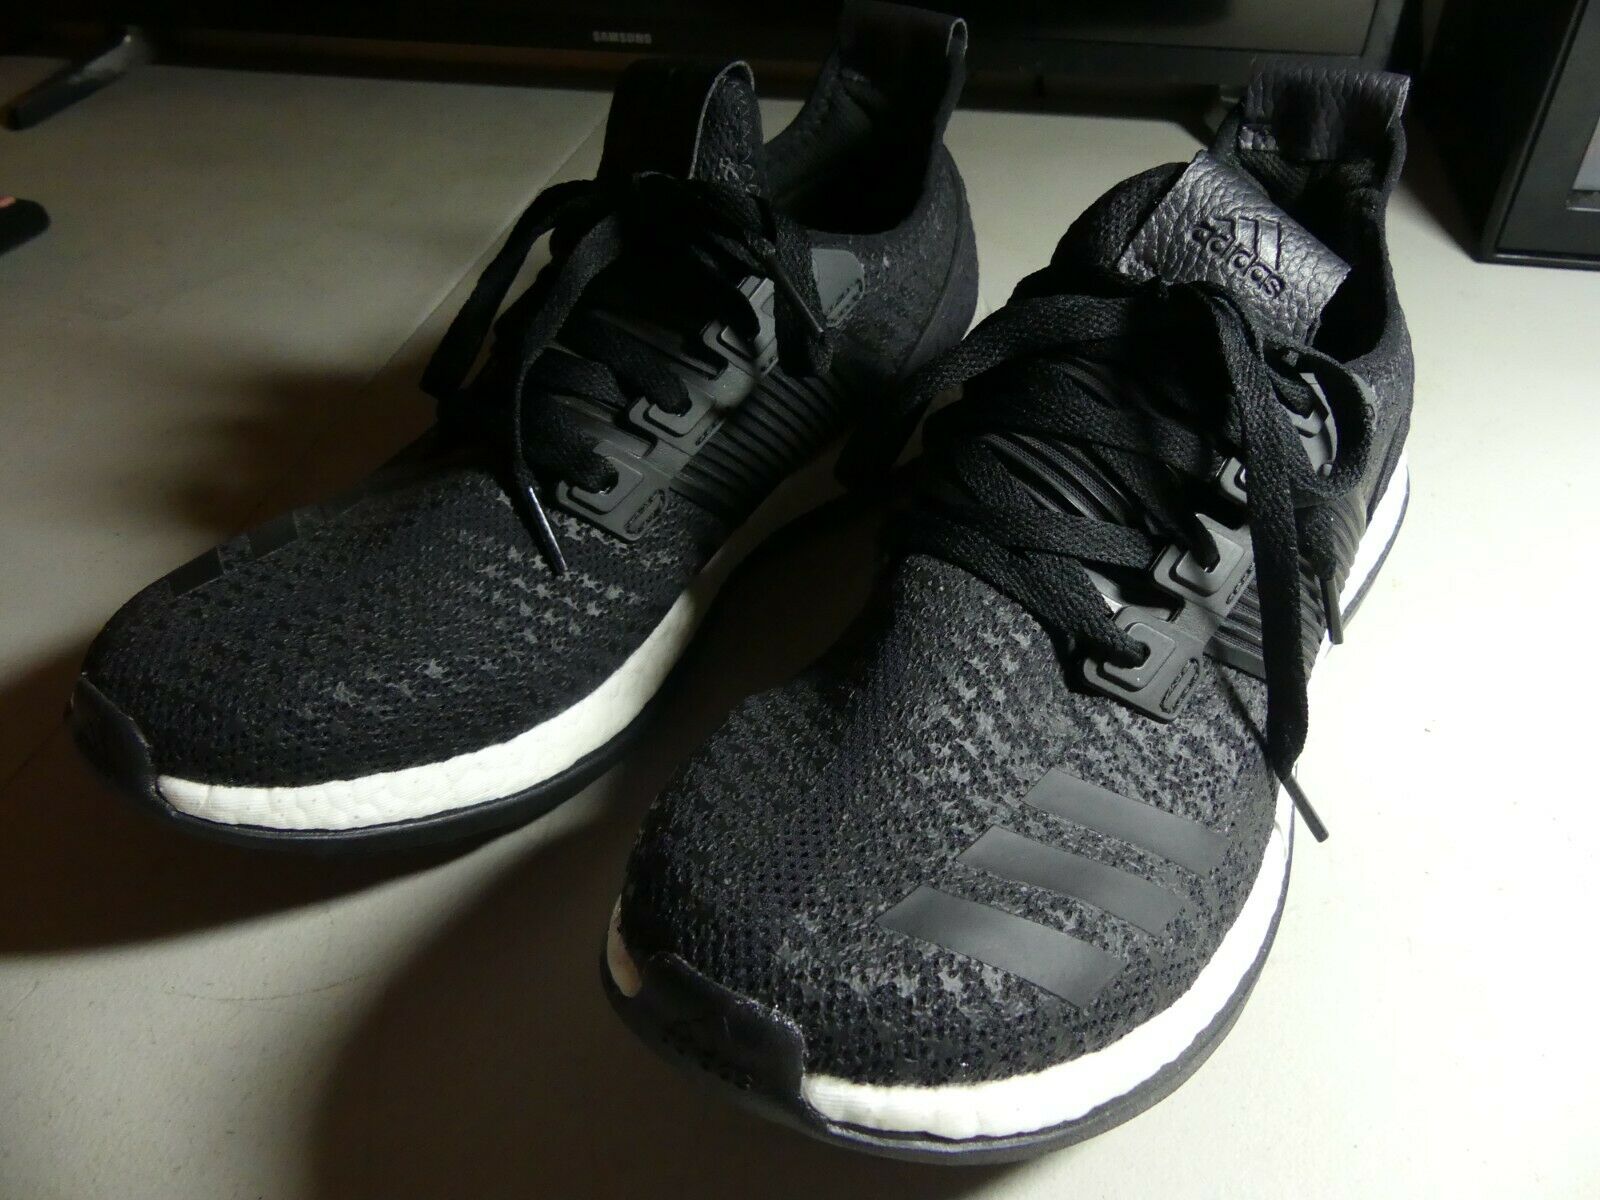 Adidas Ultraboost Mens Sz 11 Black Knit Running Athletic Shoes, Mint Condition